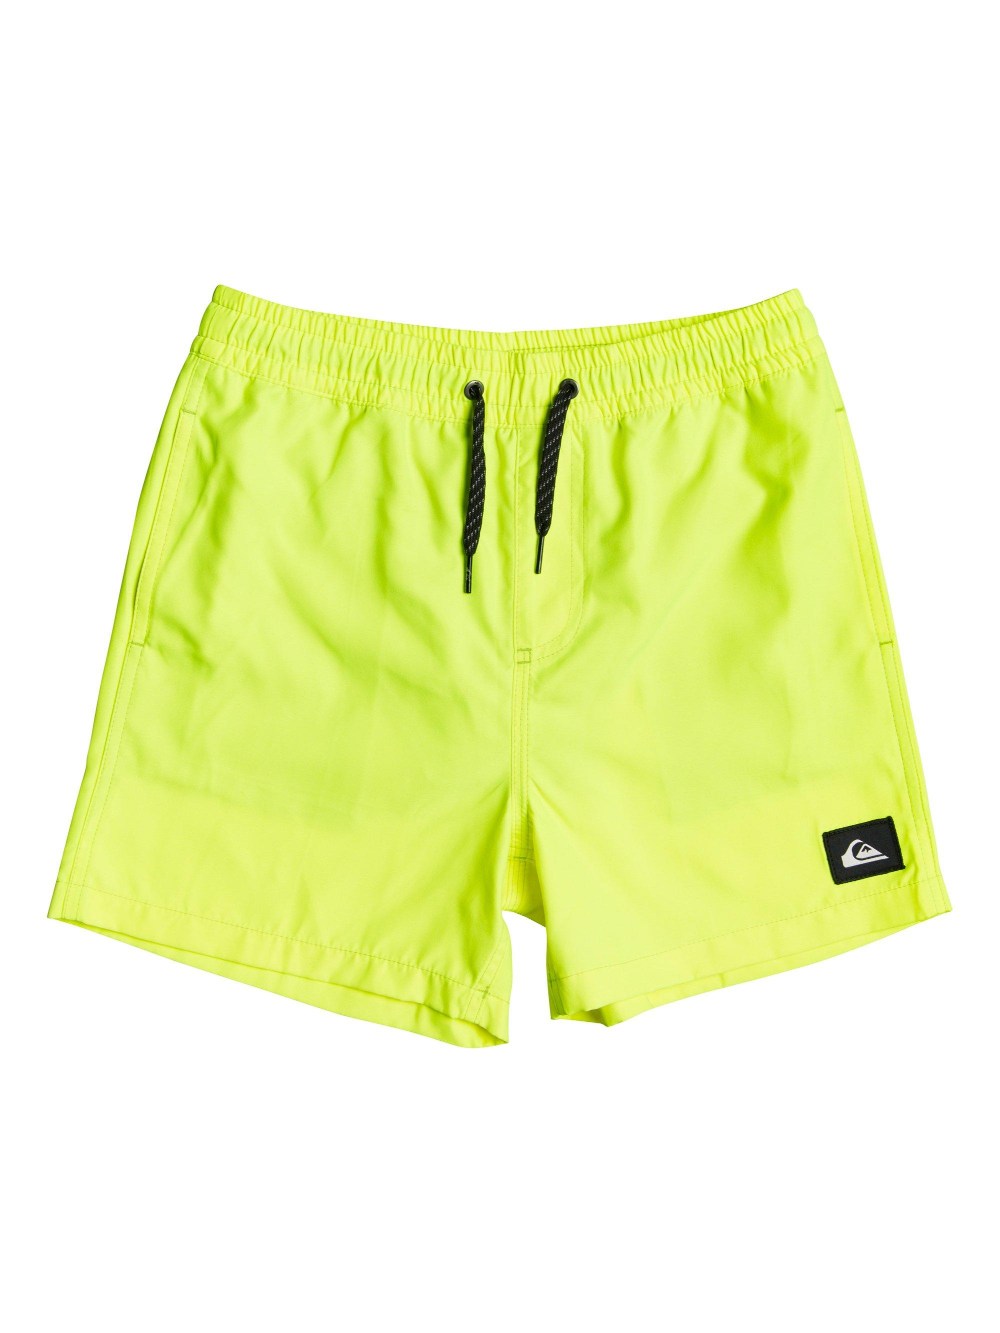 BAÑADOR EVERYDAY VOLLEY YOUTH 13 POLYESTER SAFETY YELLOW